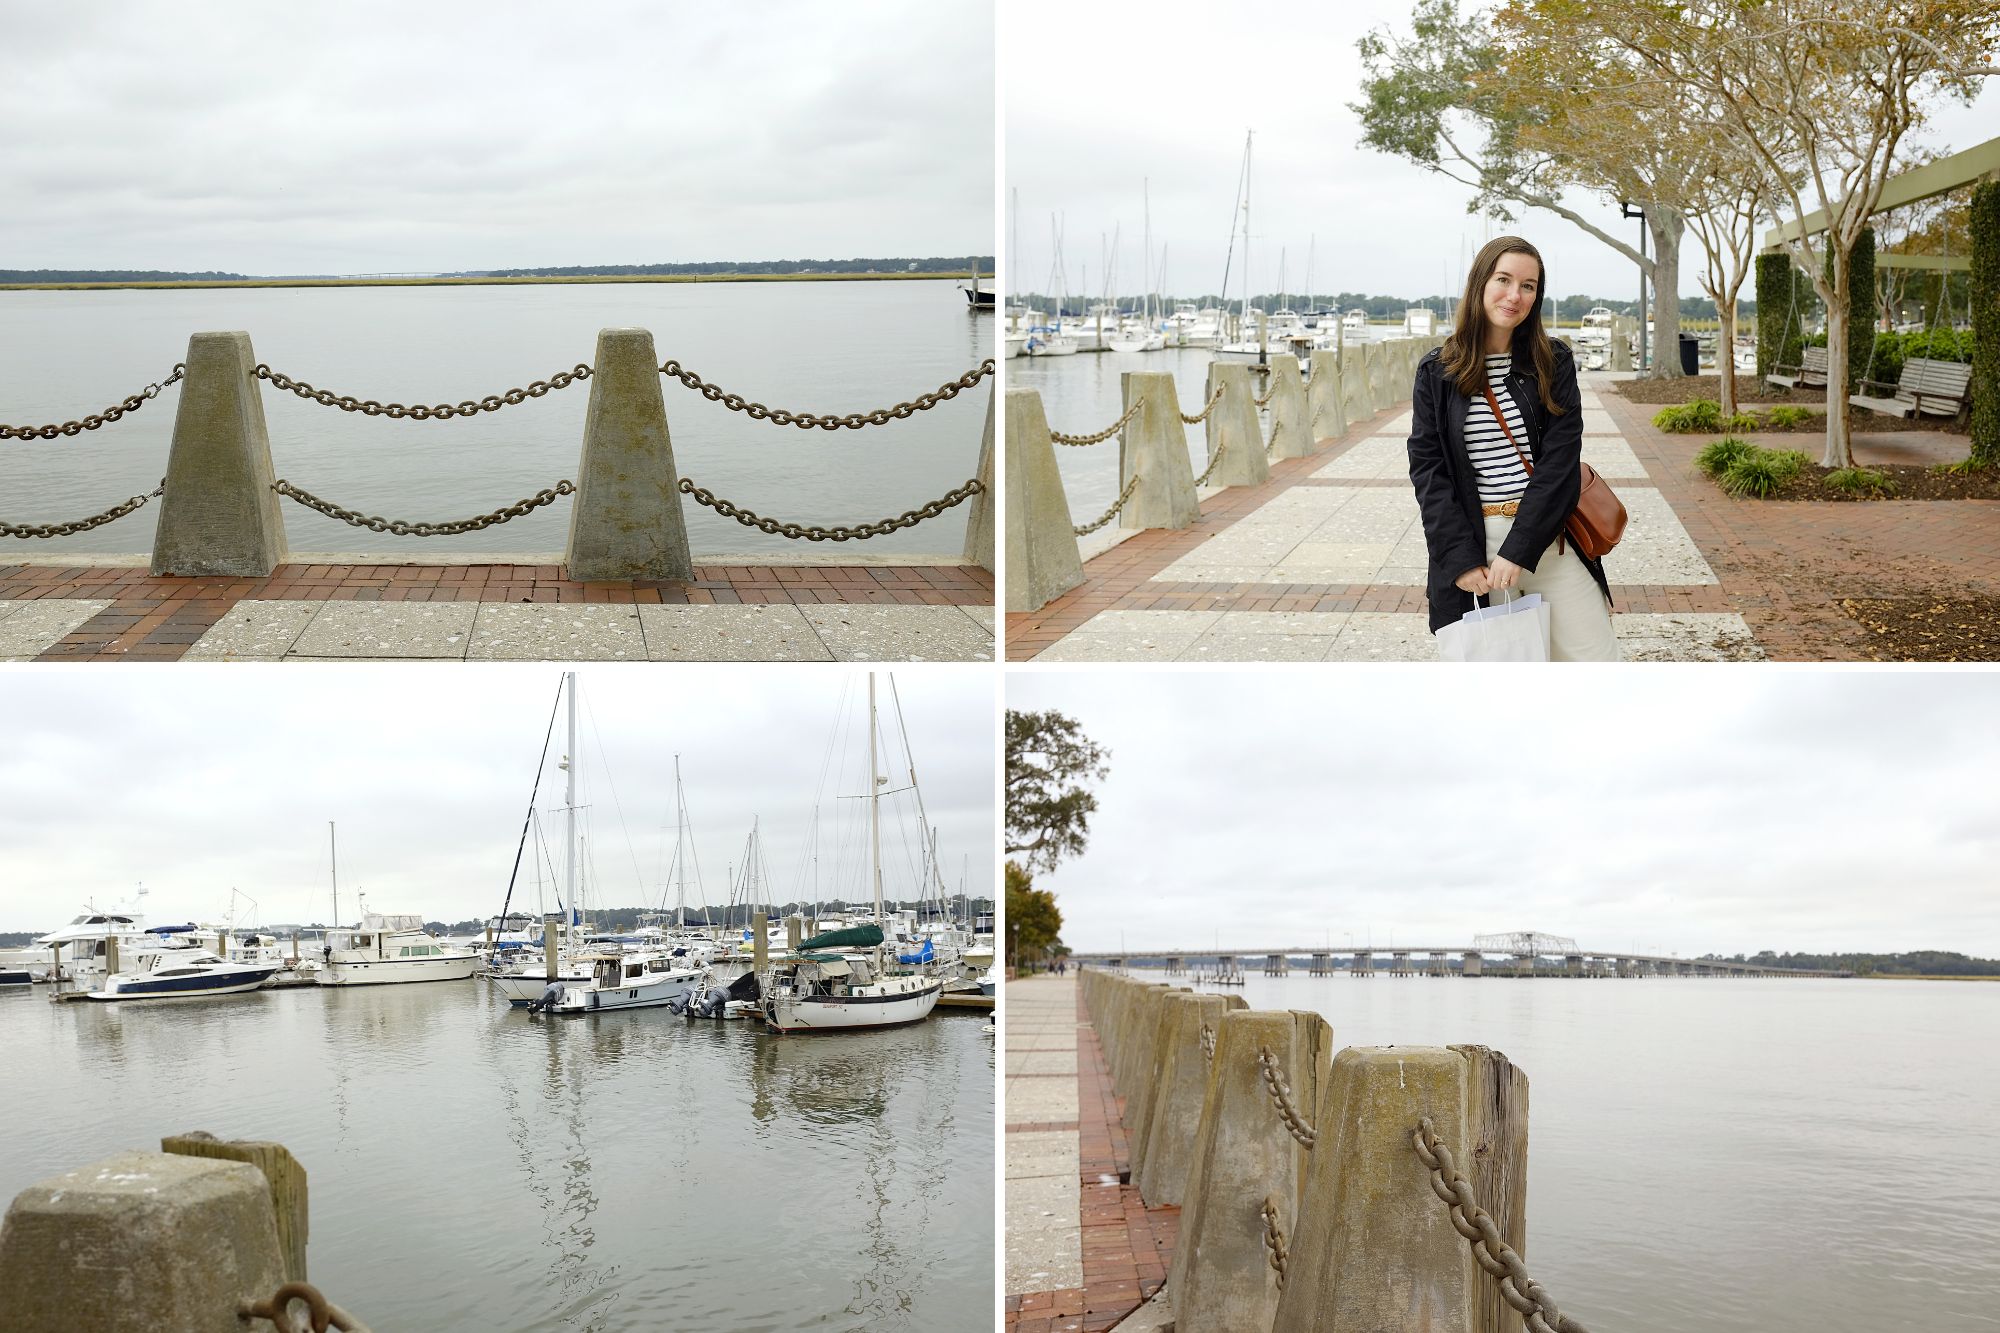 Collage of images of the bay taken from Henry C. Chambers Waterfront Park